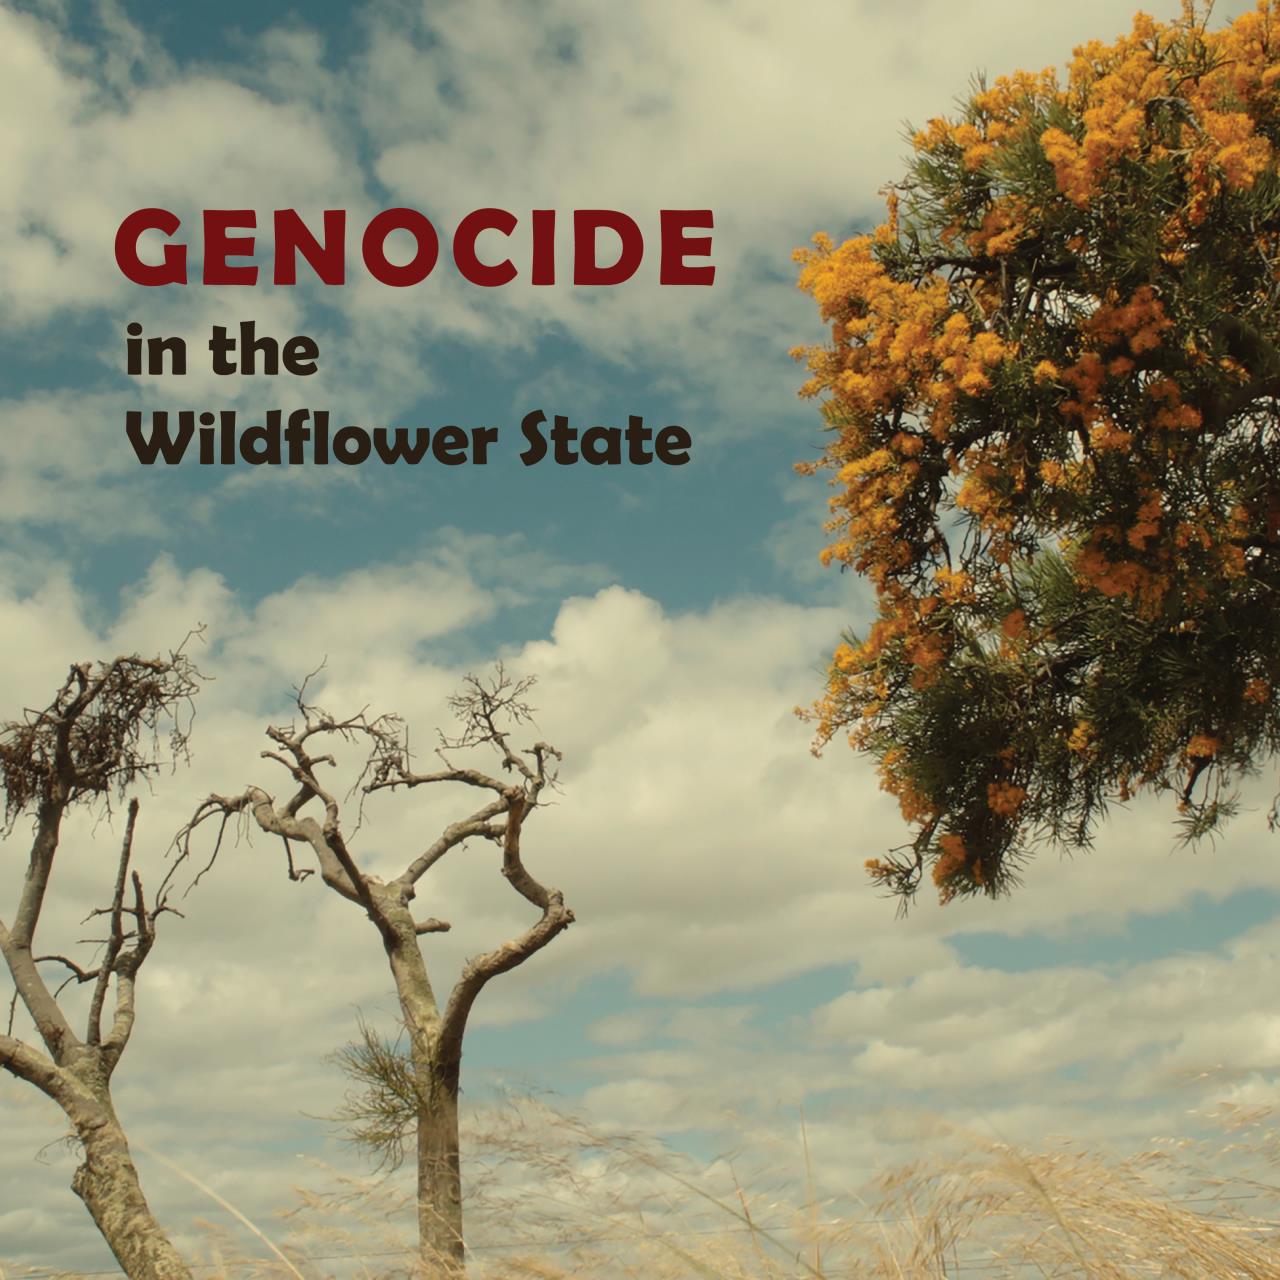 Genocide in the Wildflower State